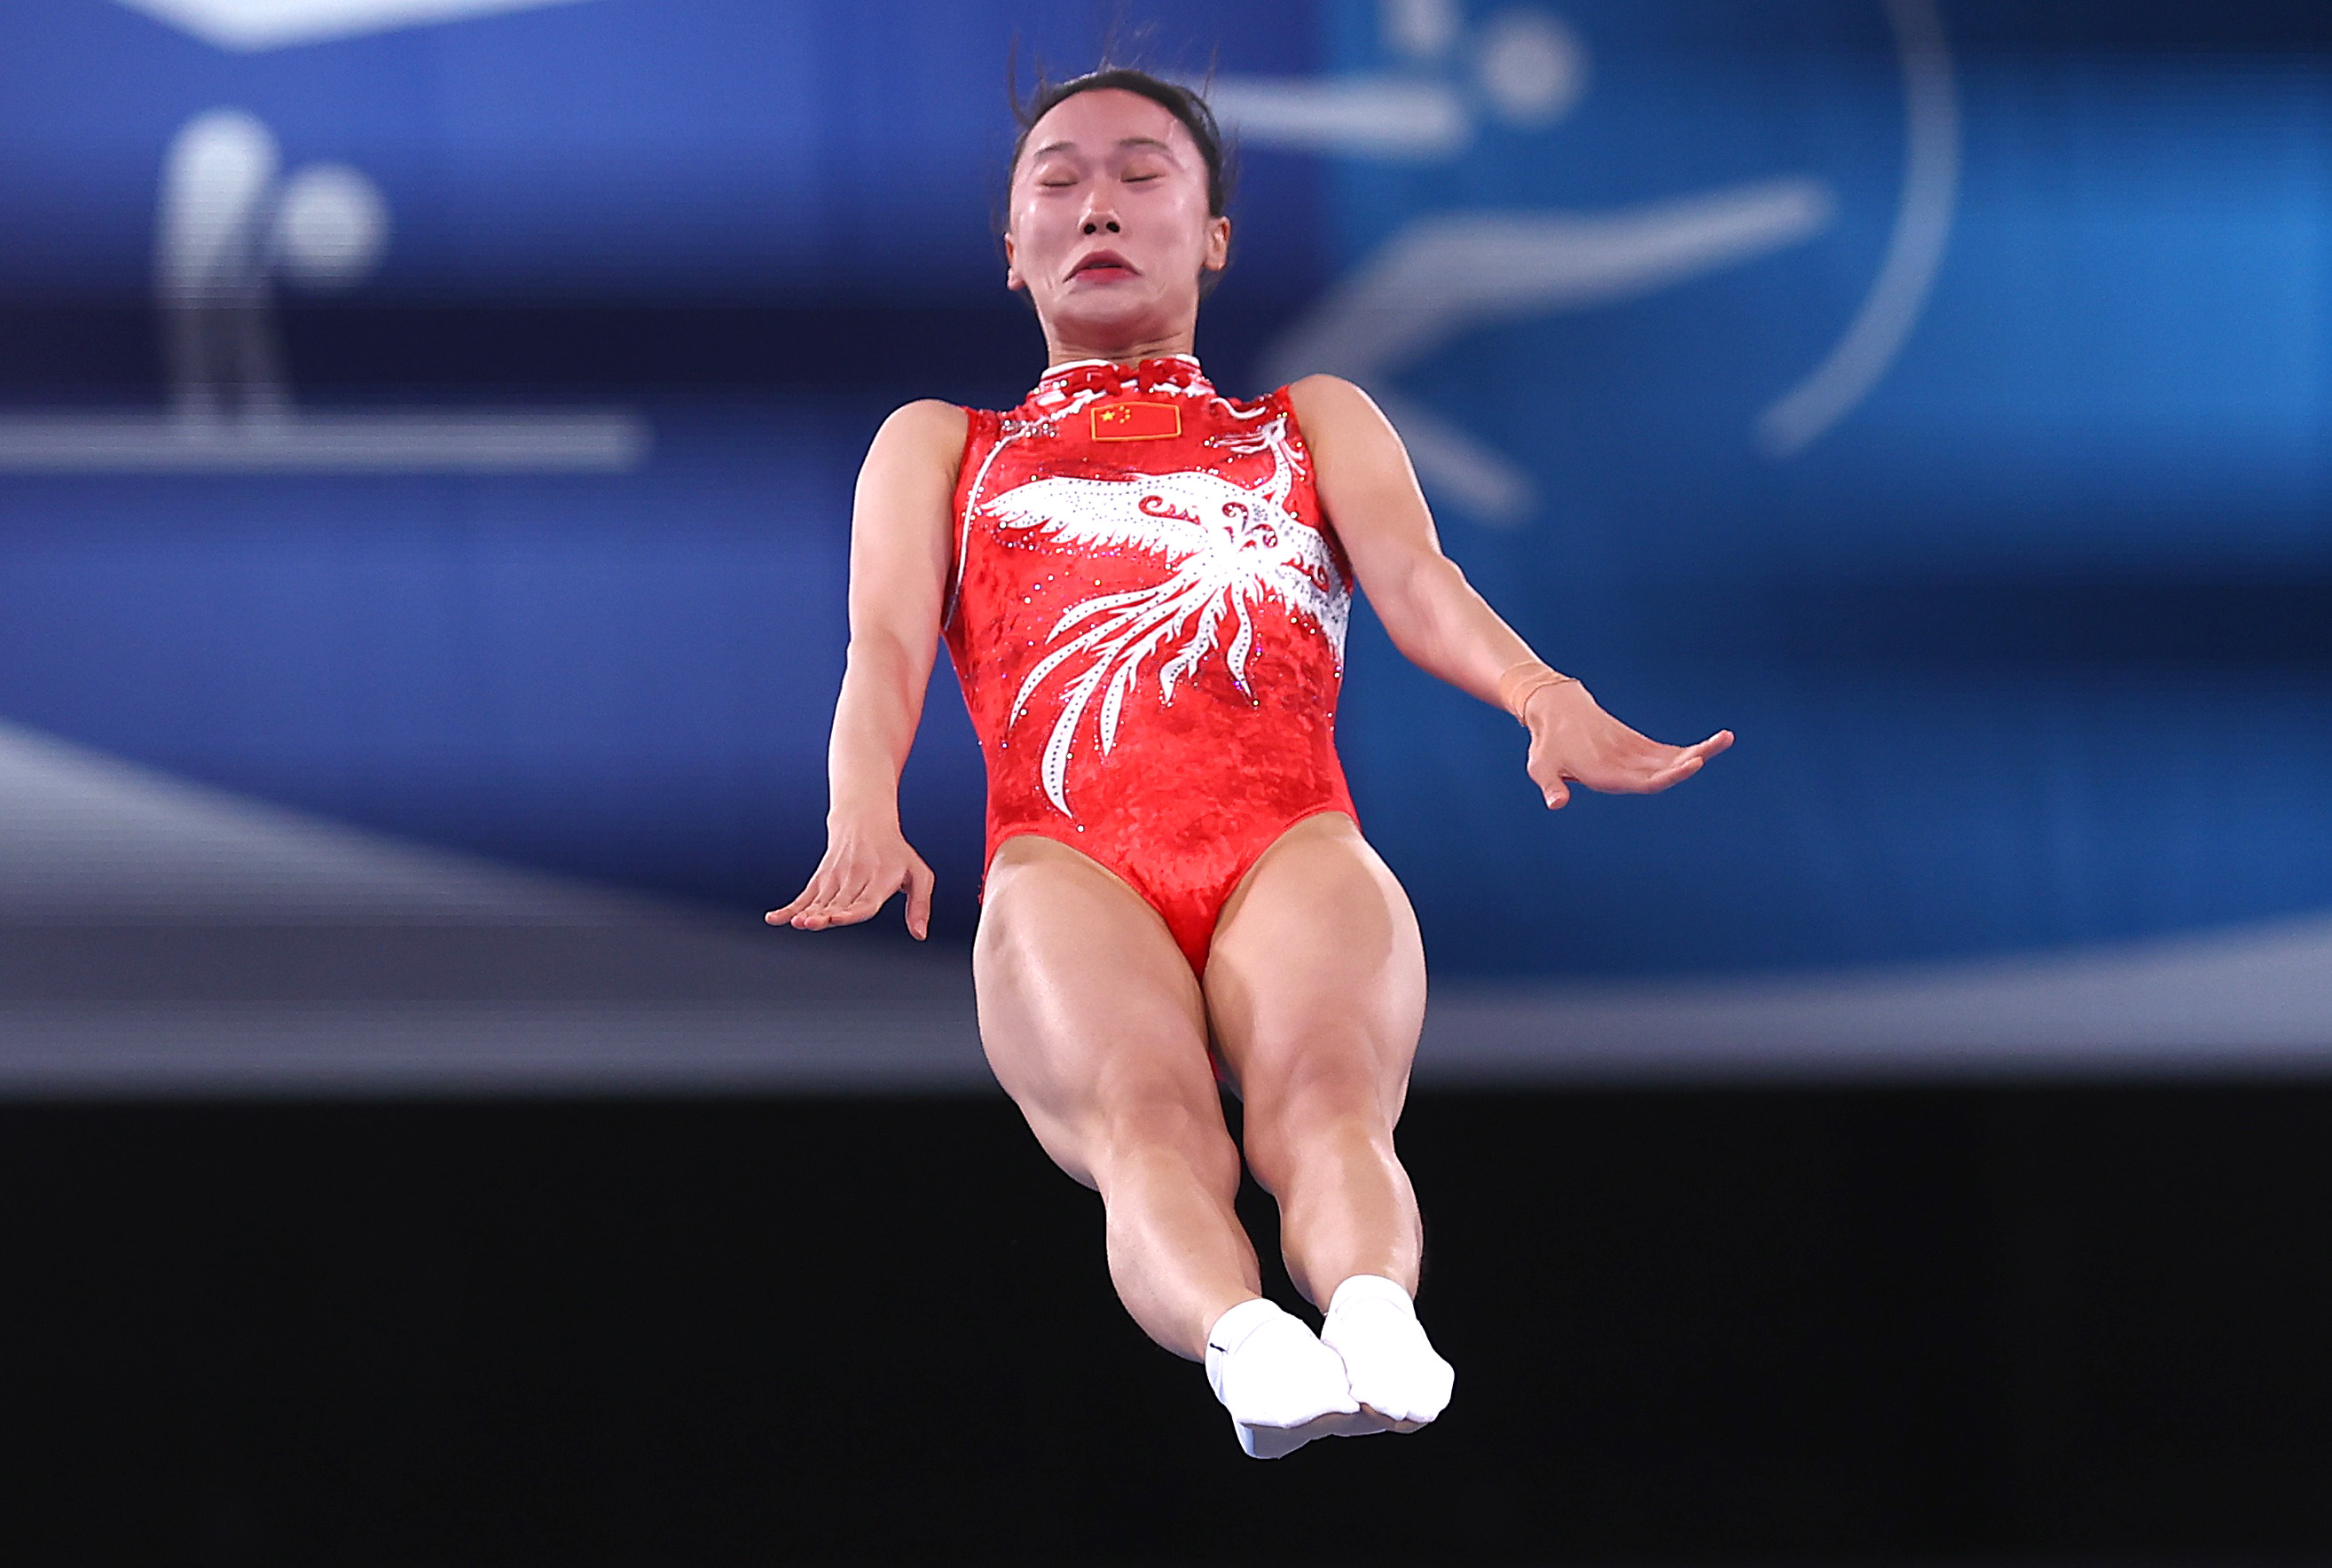 Gymnastics-Zhu leads China one-two in trampoline | Reuters